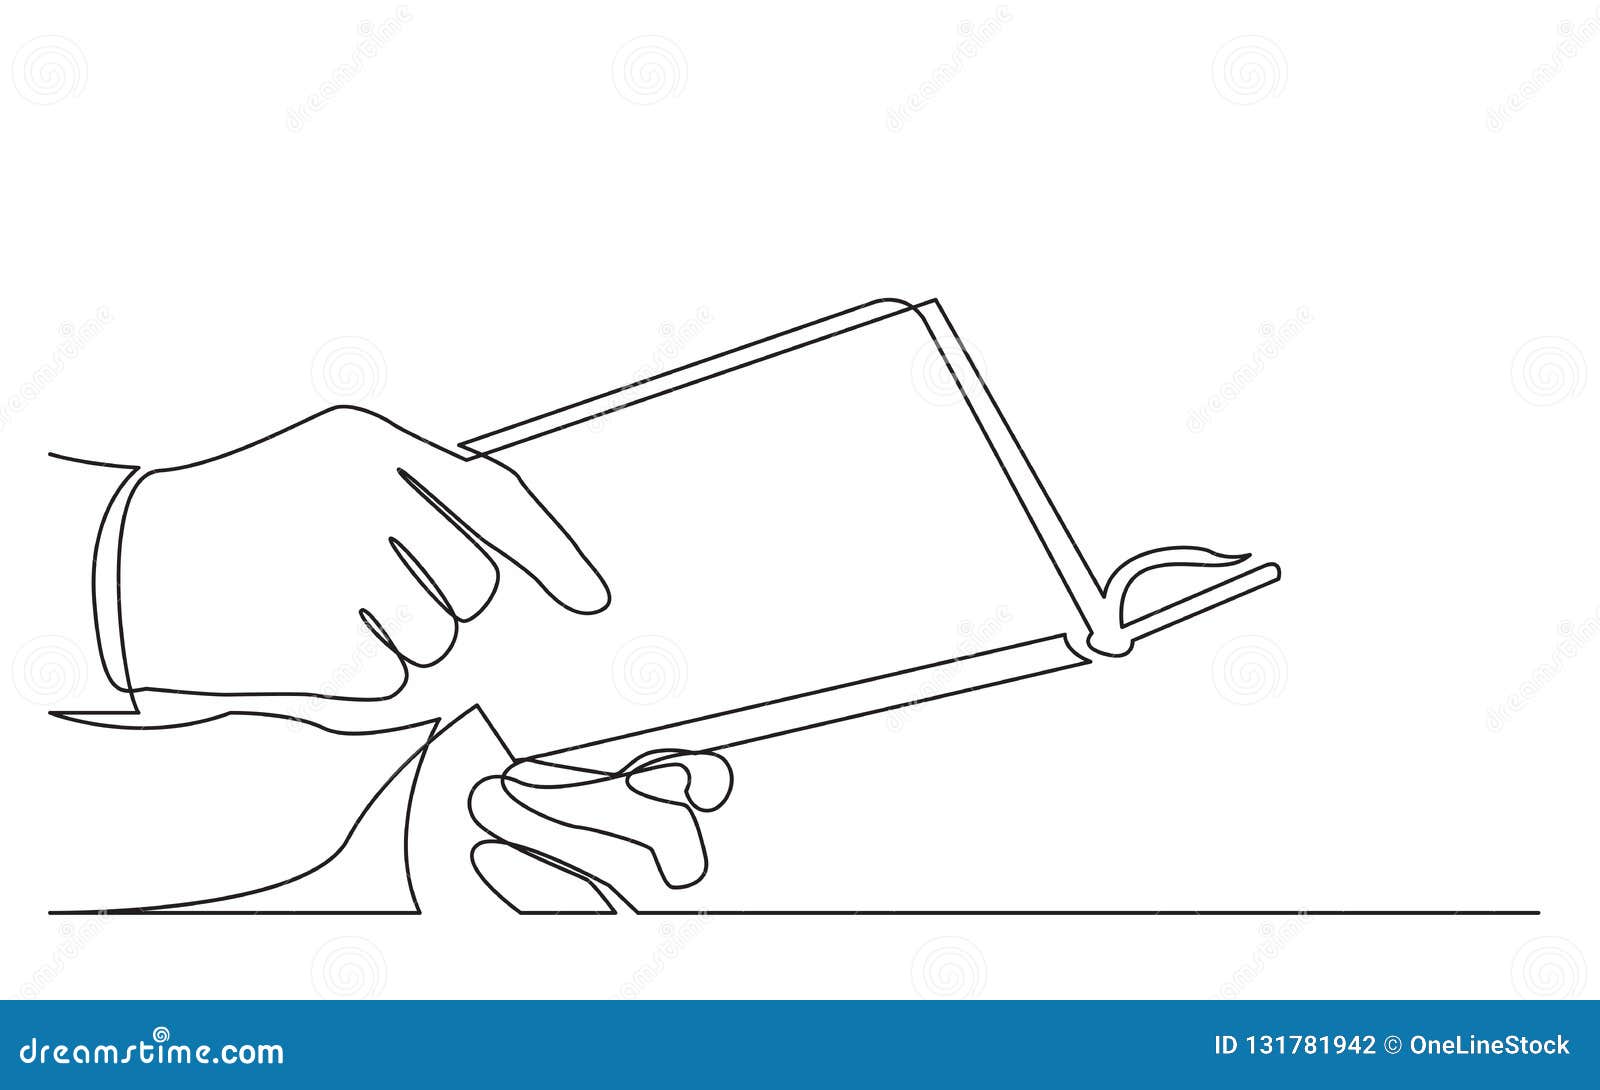 continuous line drawing of hands holding book vector linear illustration.